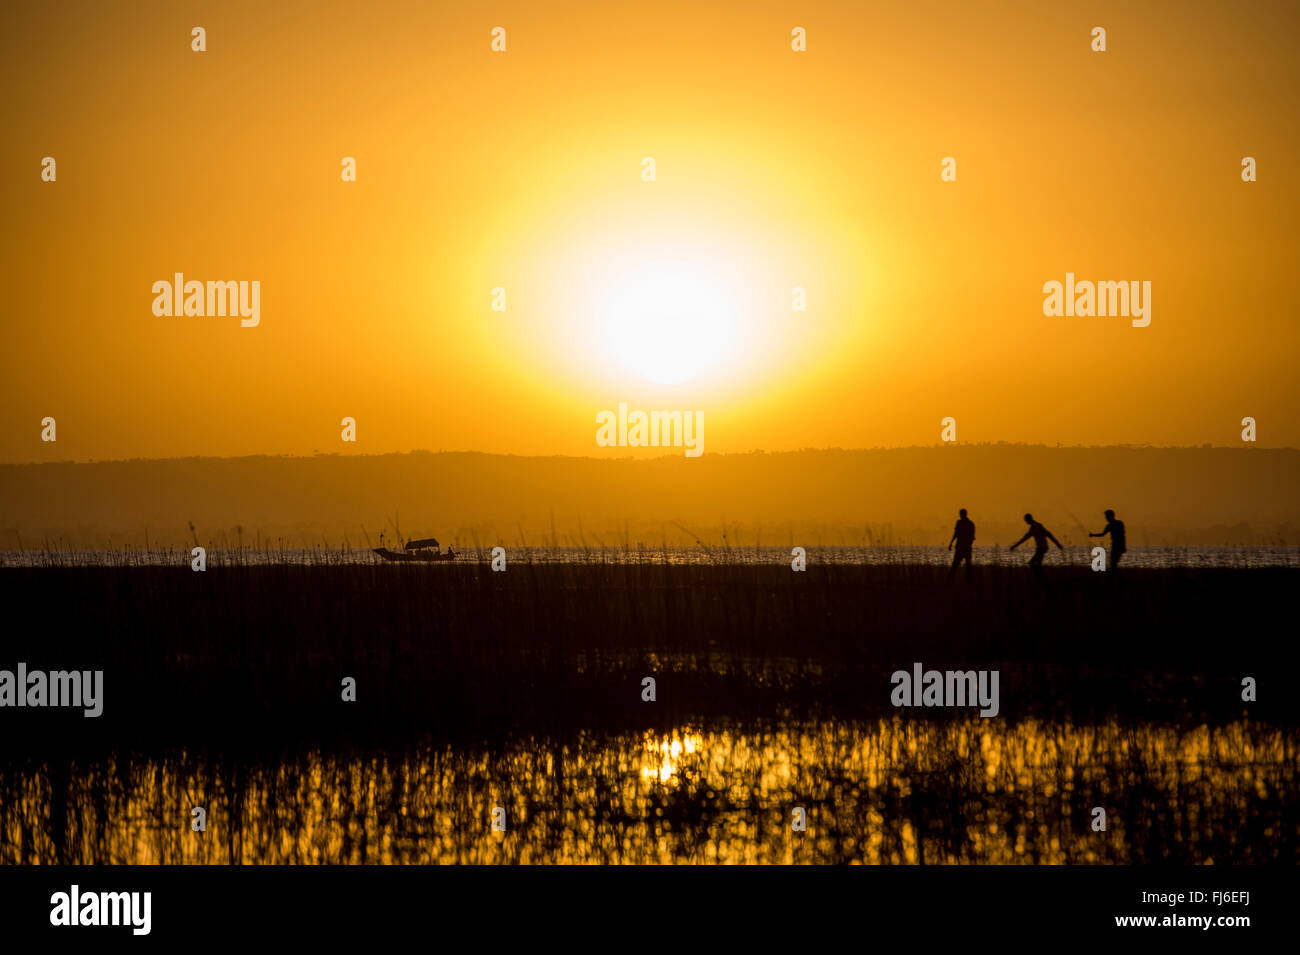 Local people walking on pier at dusk Lake Ziway, Ethiopia, Africa Stock Photo